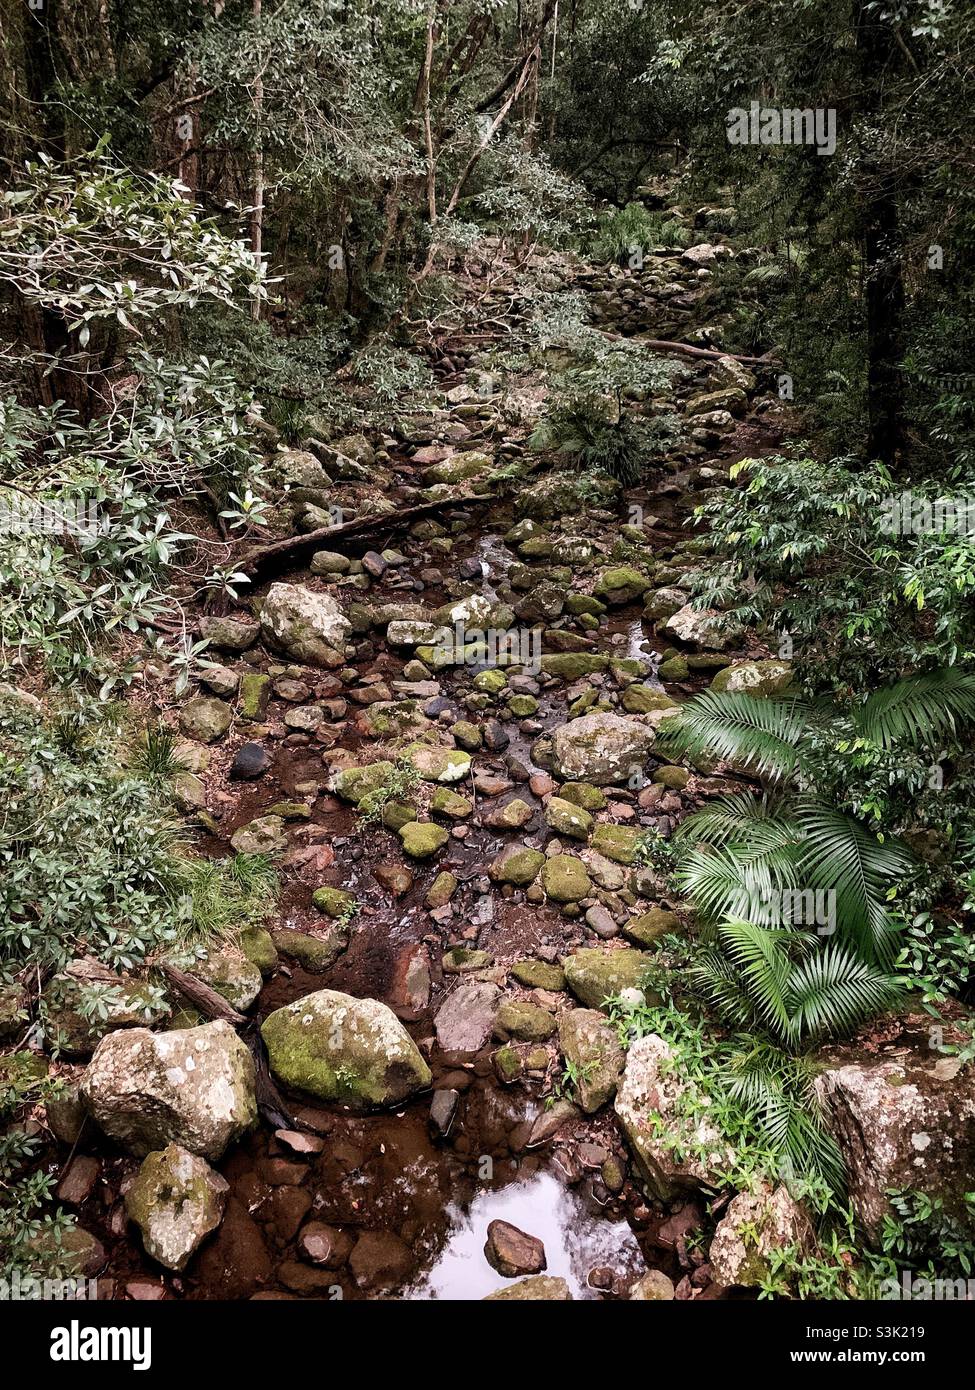 Rocky Creek at the Cooloola in Conservation Park - Kiamba Rd. Section showing the rocky creek bed, slow moving water, and rainforest palms. Stock Photo